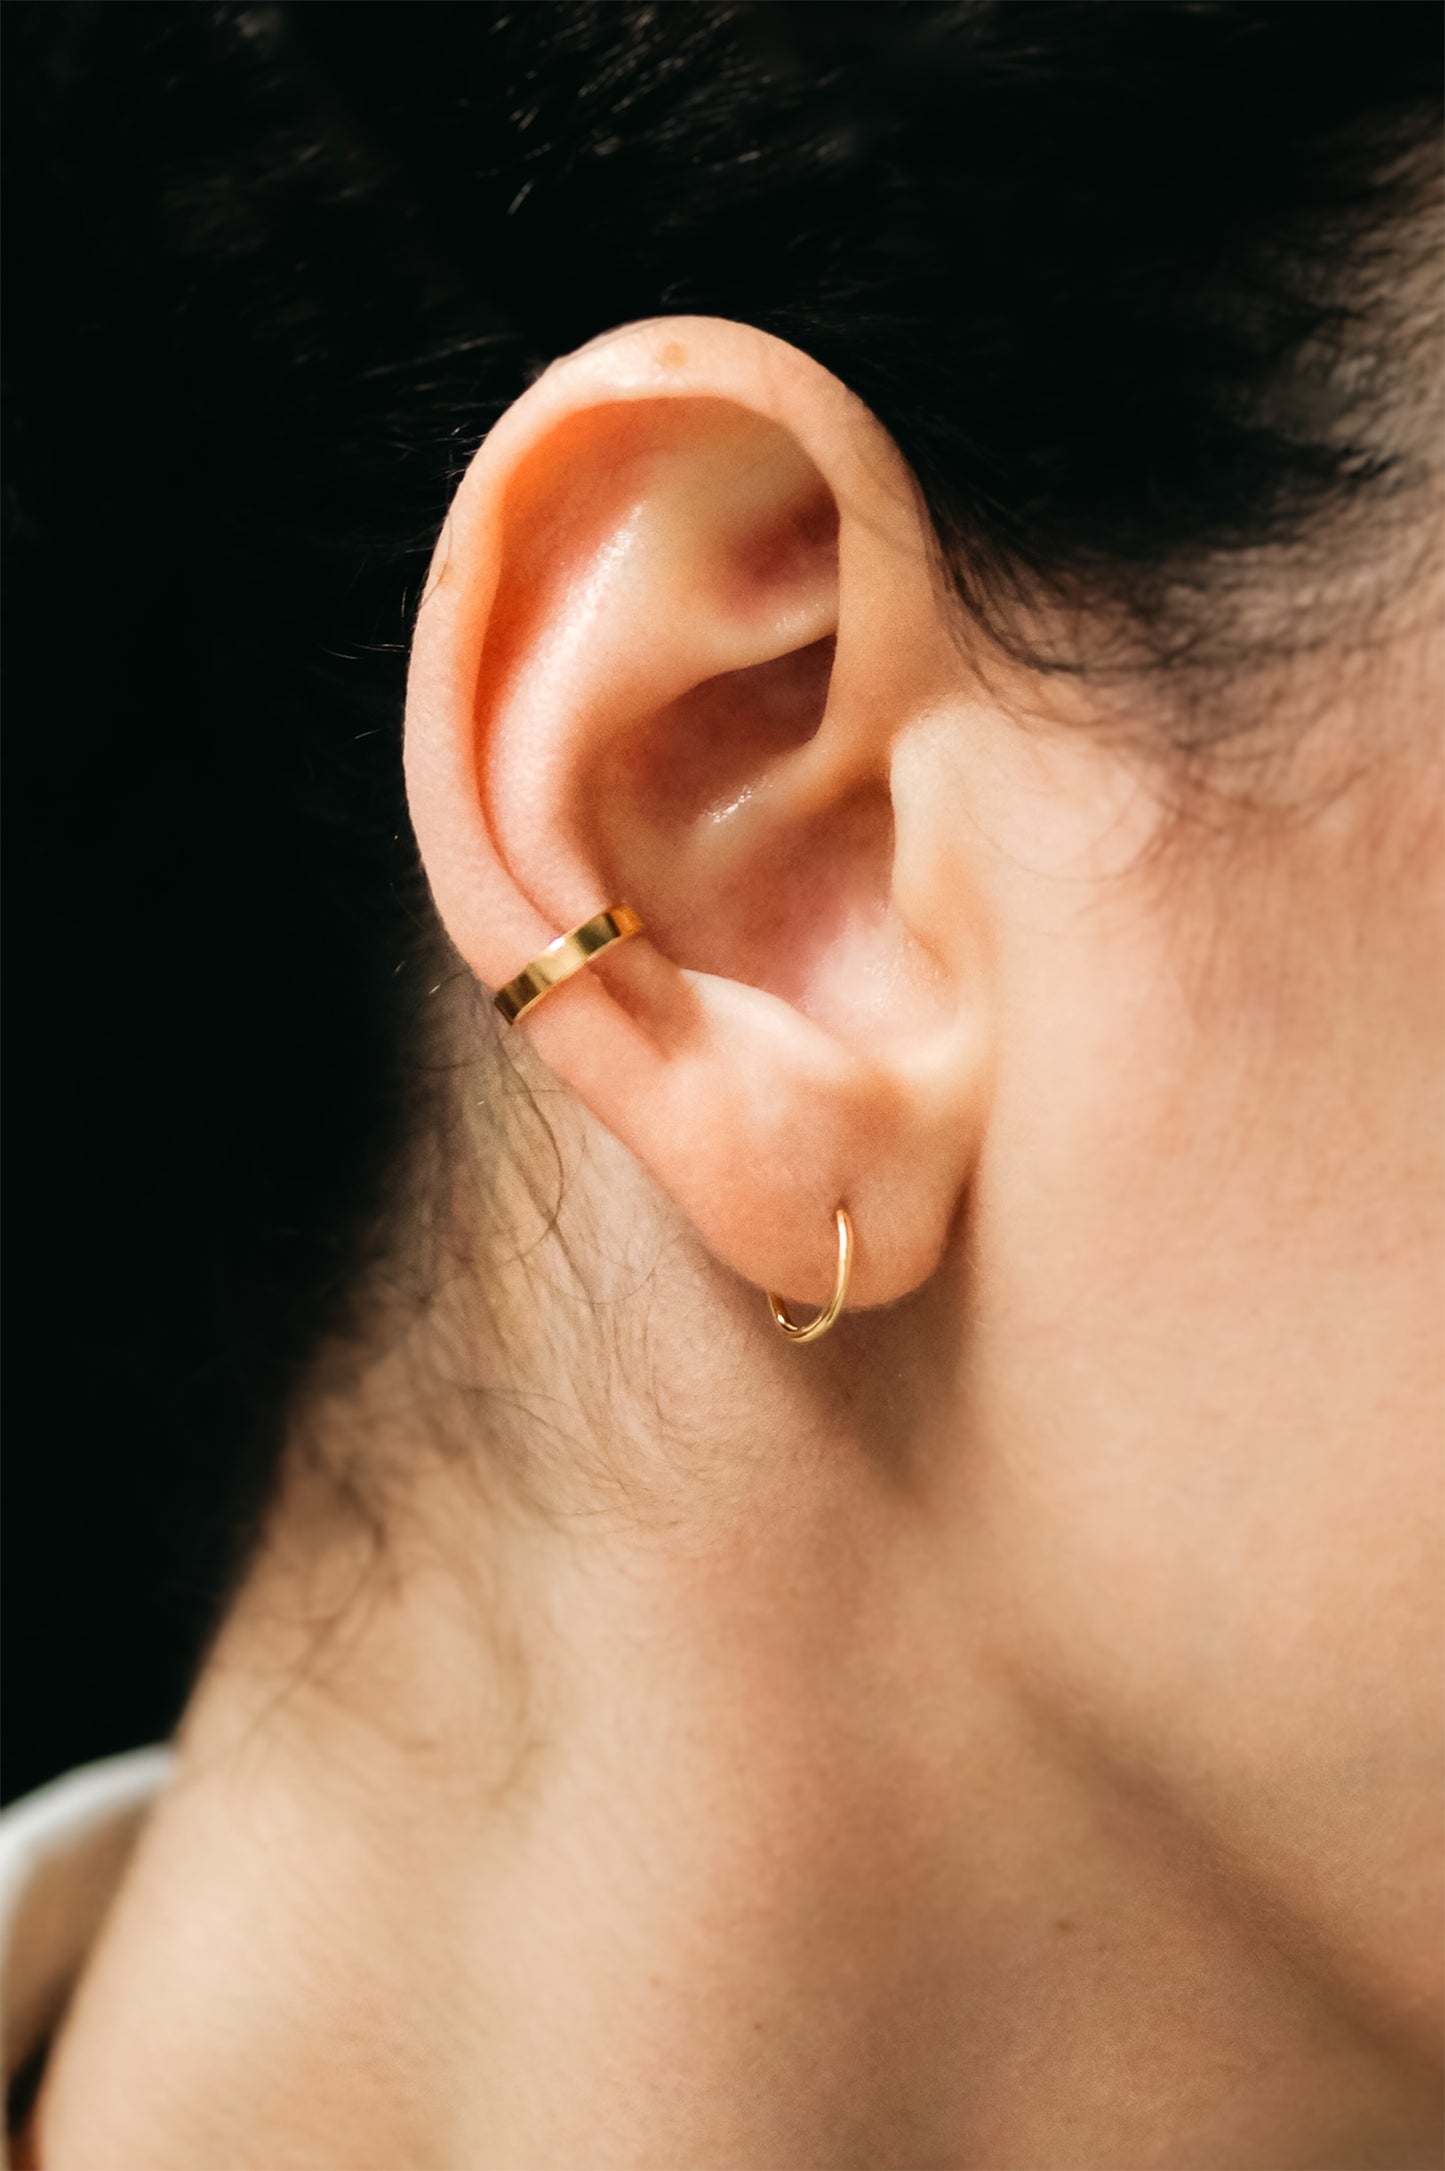 Extra Thick Ear Cuff + Huggie Hoop Set of Earrings, 14k Gold Fill